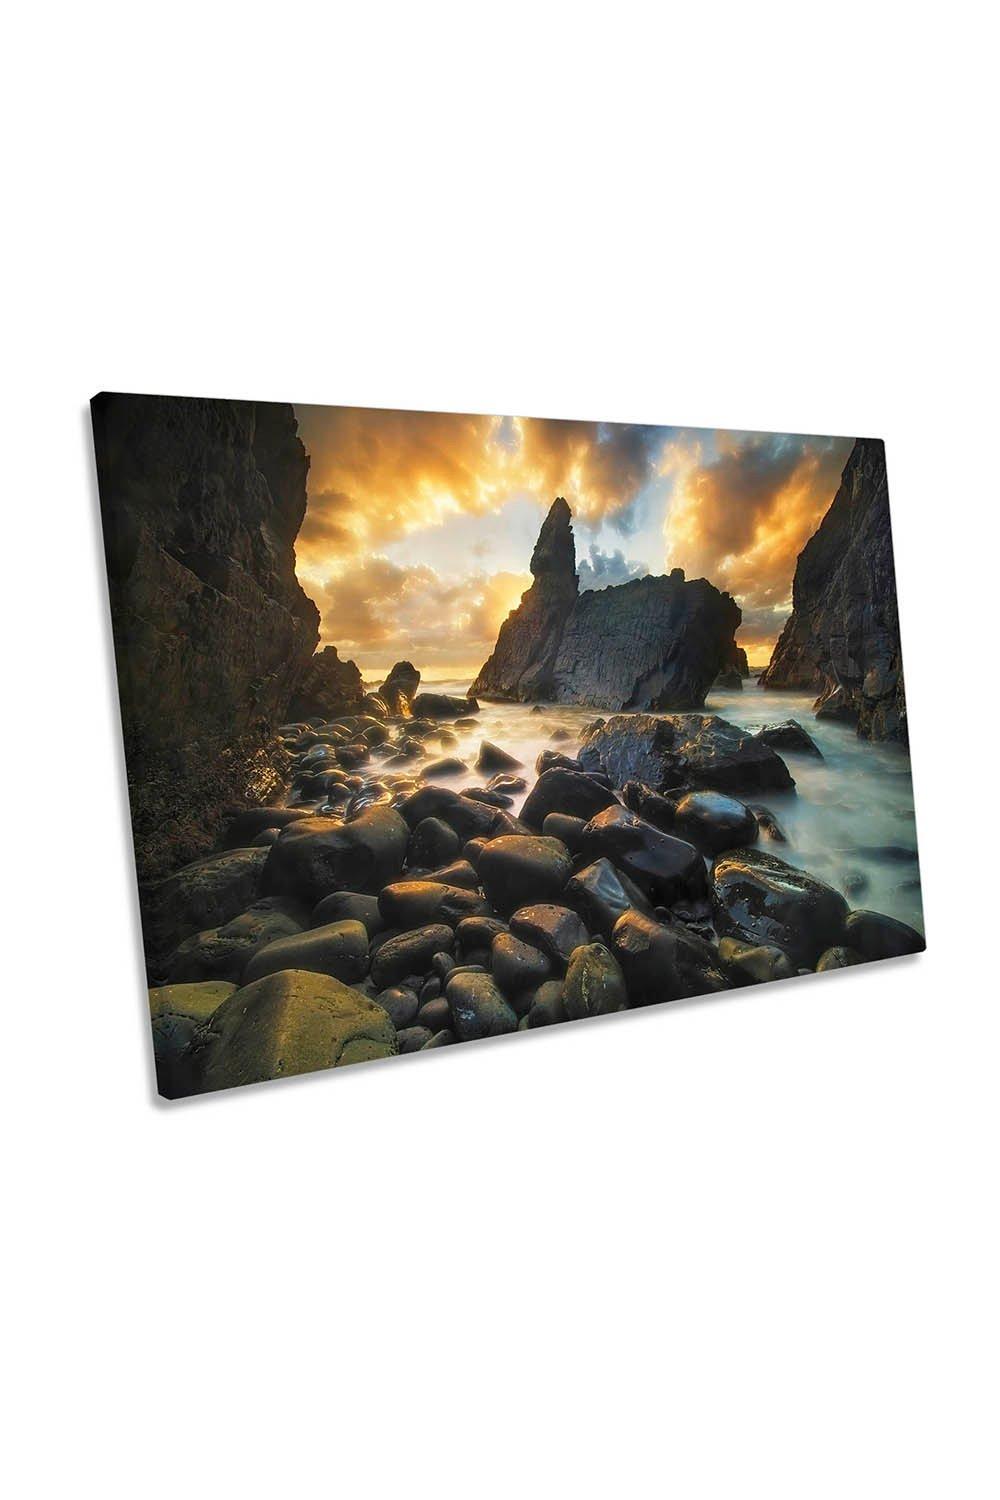 A Place of Solitude Ocean Seascape Canvas Wall Art Picture Print